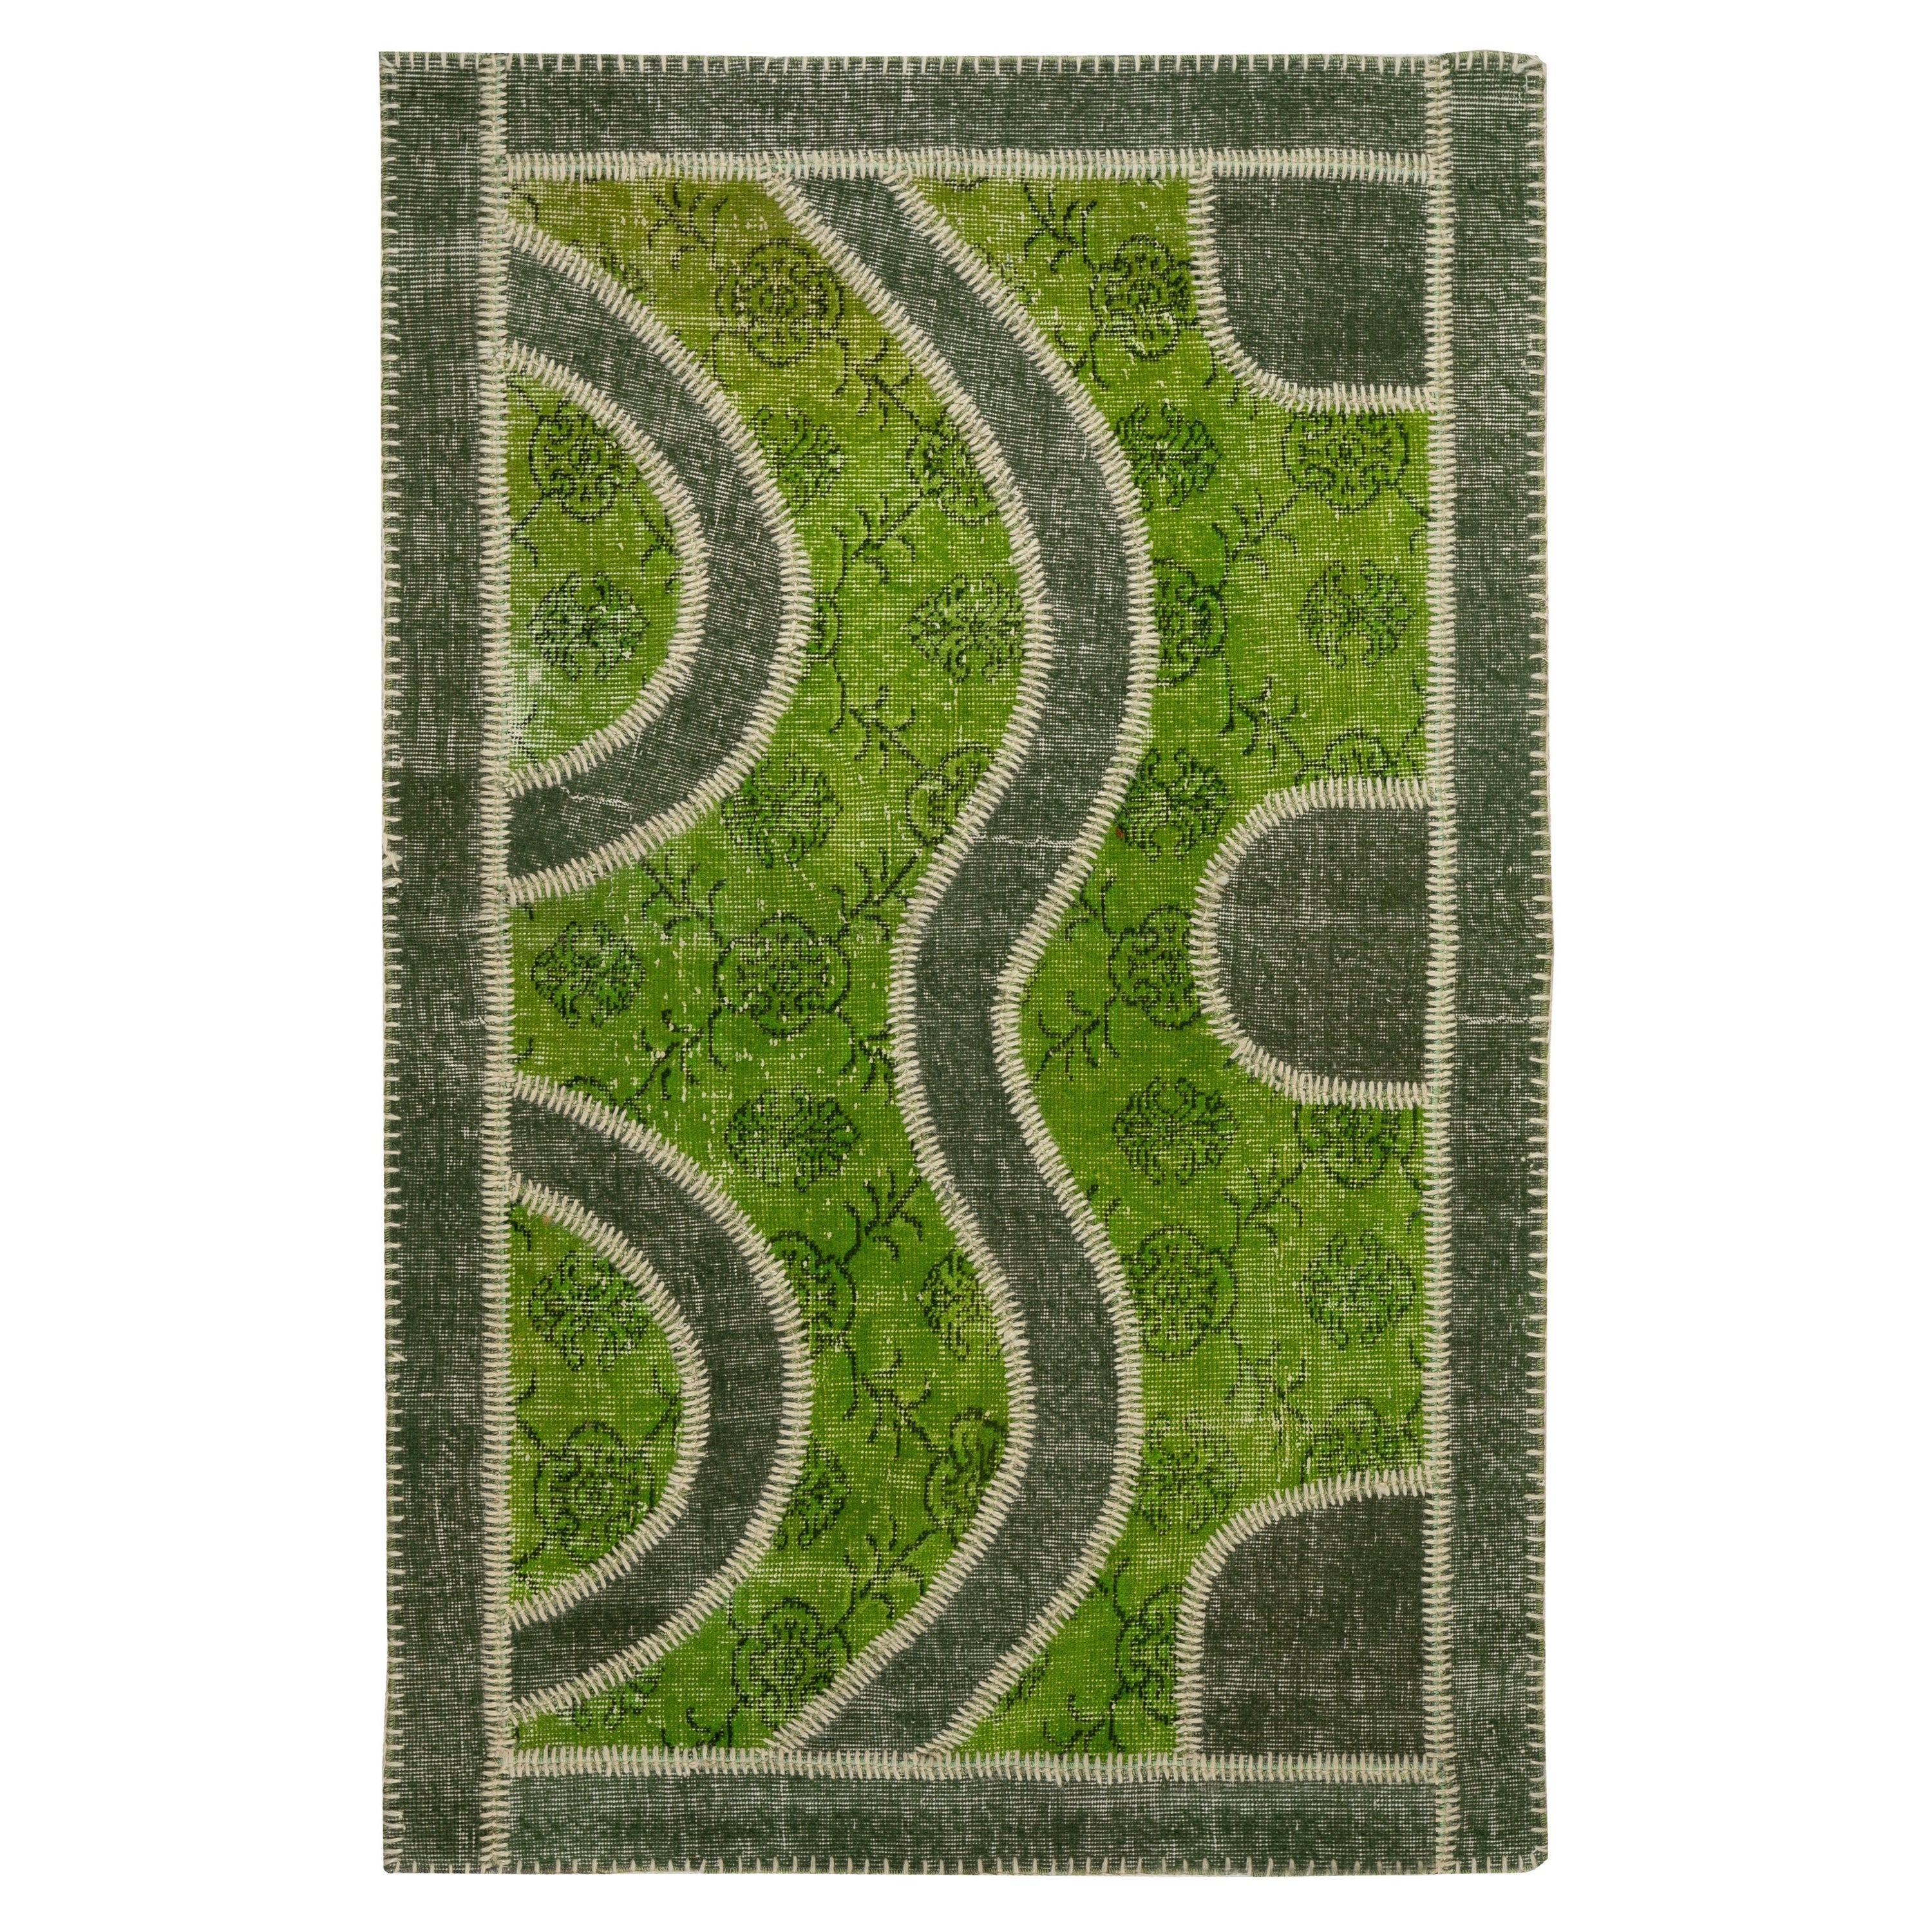 Contemporary Hand-Made Patchwork Rug in Shades of Green, Custom Colors and  Sizes For Sale at 1stDibs